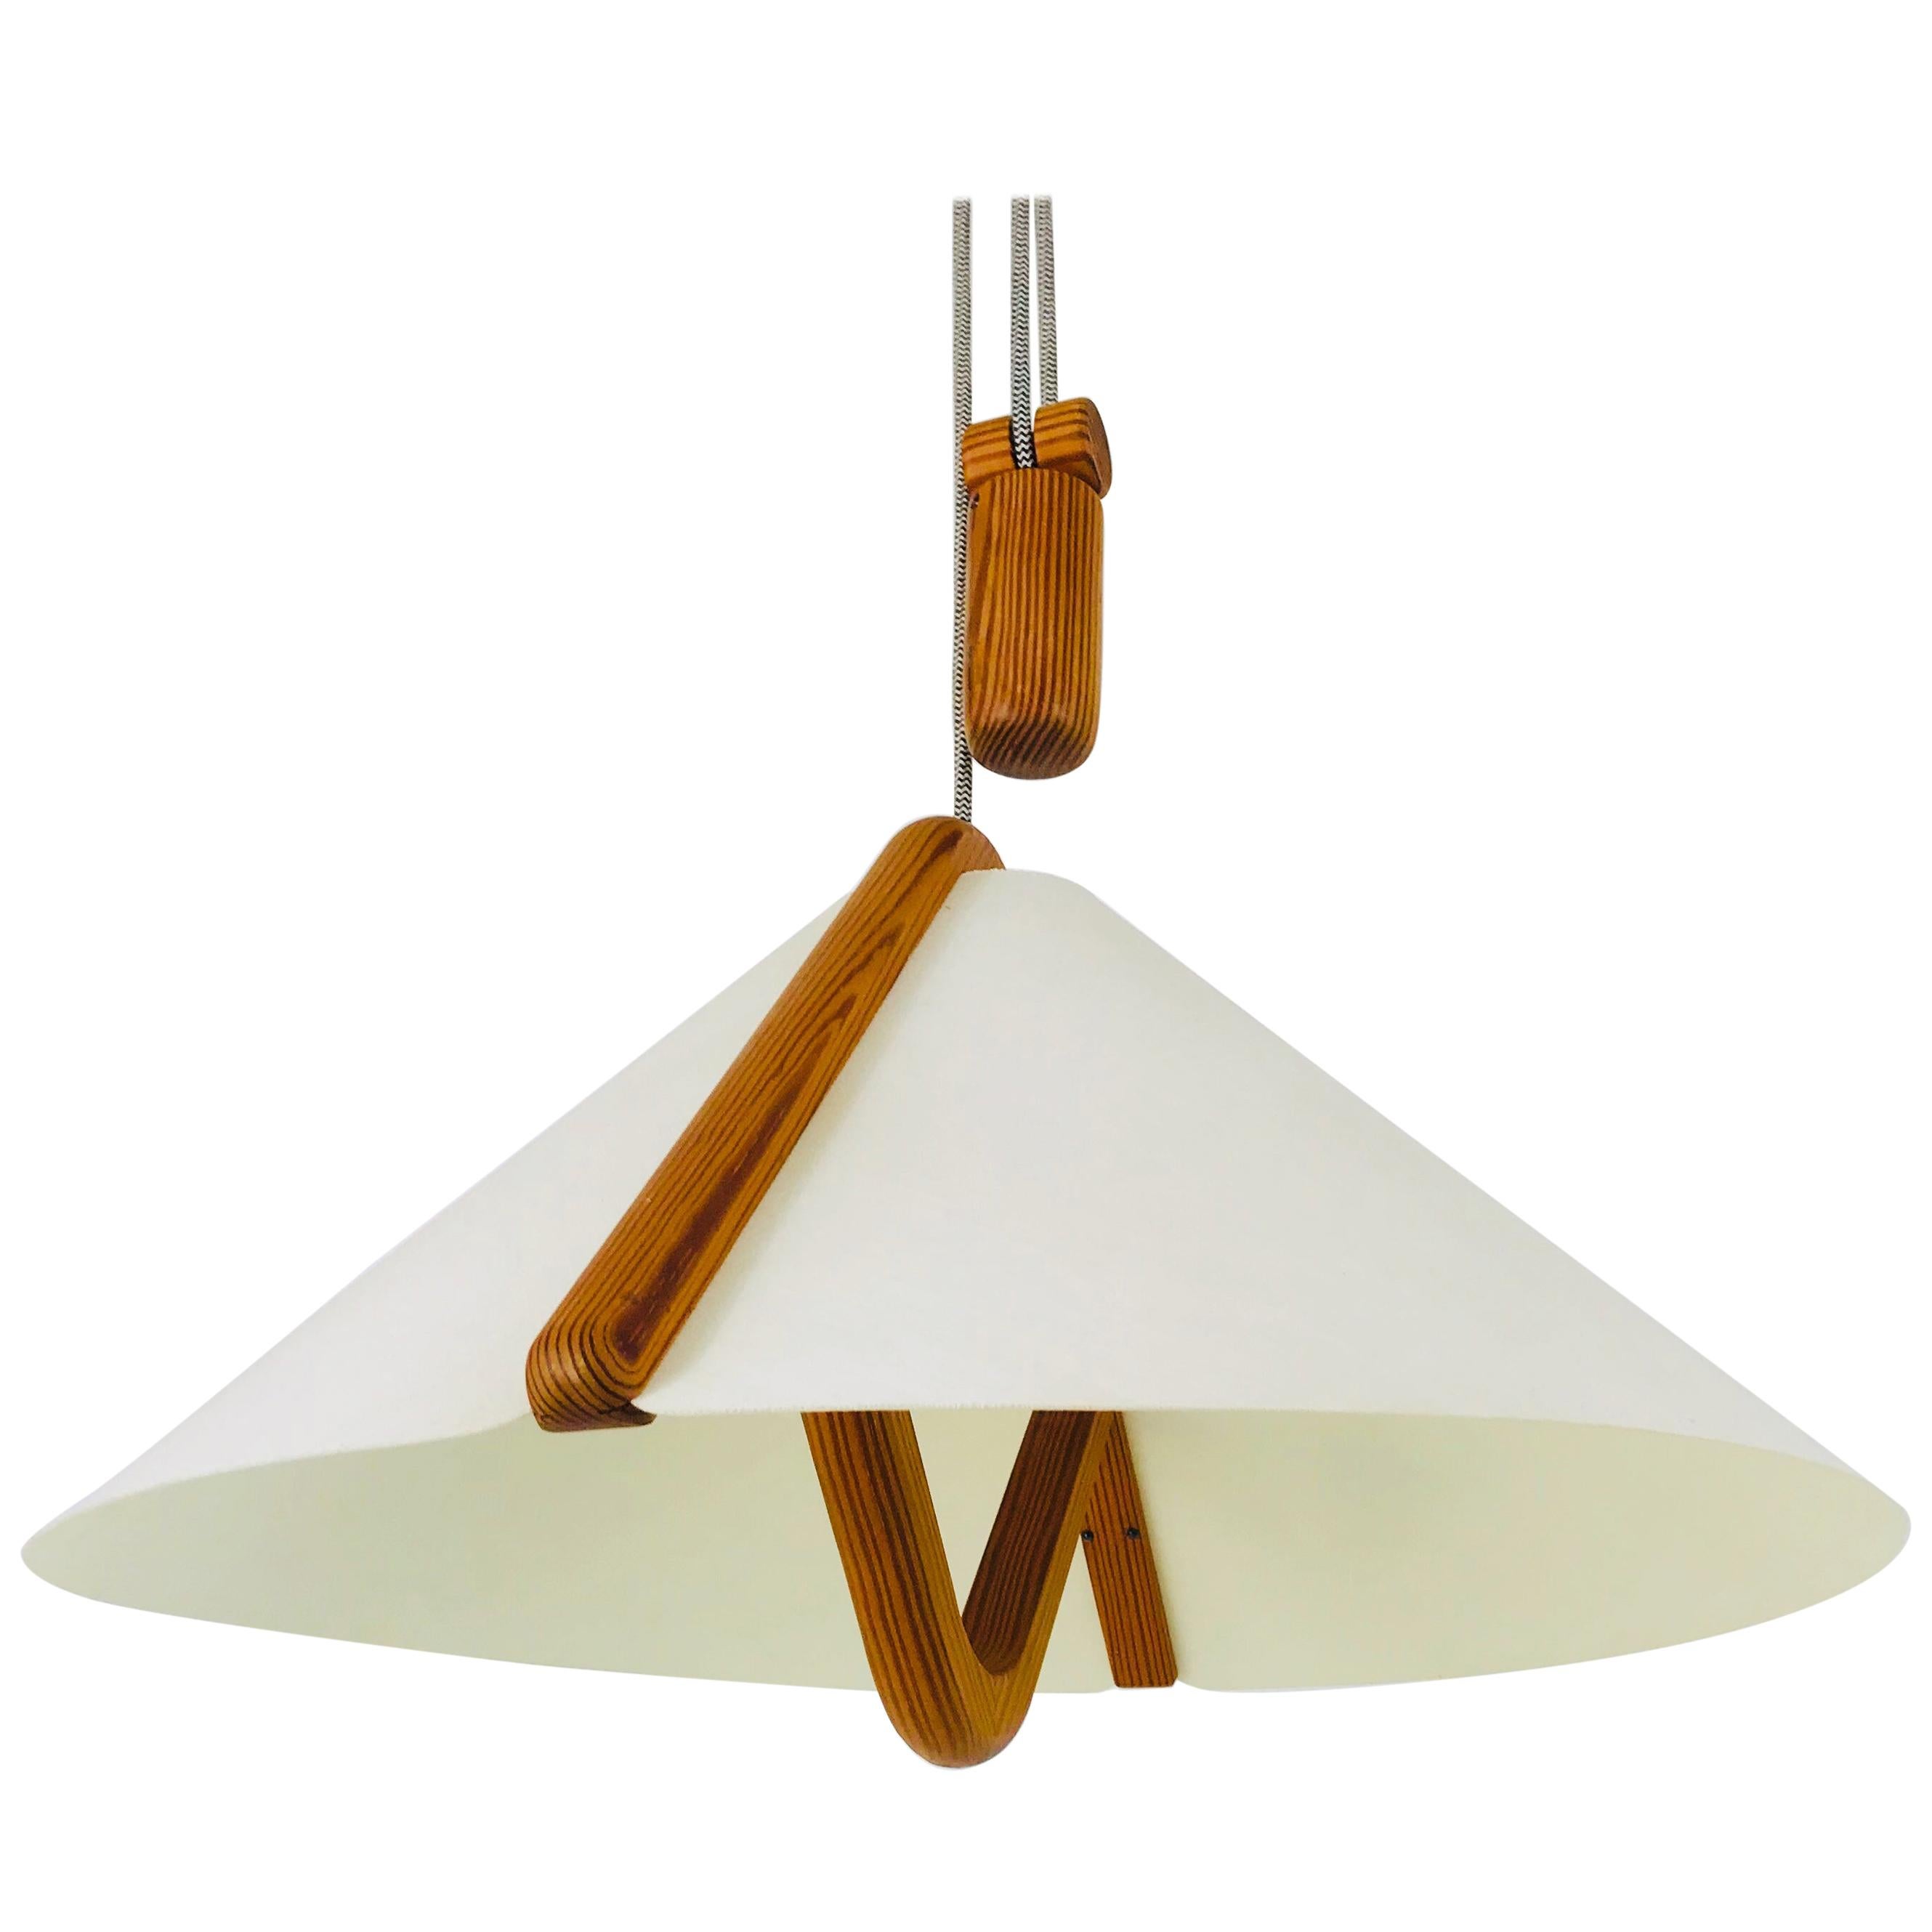 Adjustable Midcentury Wooden Pendant Lamp with Counterweight by Domus, 1960s